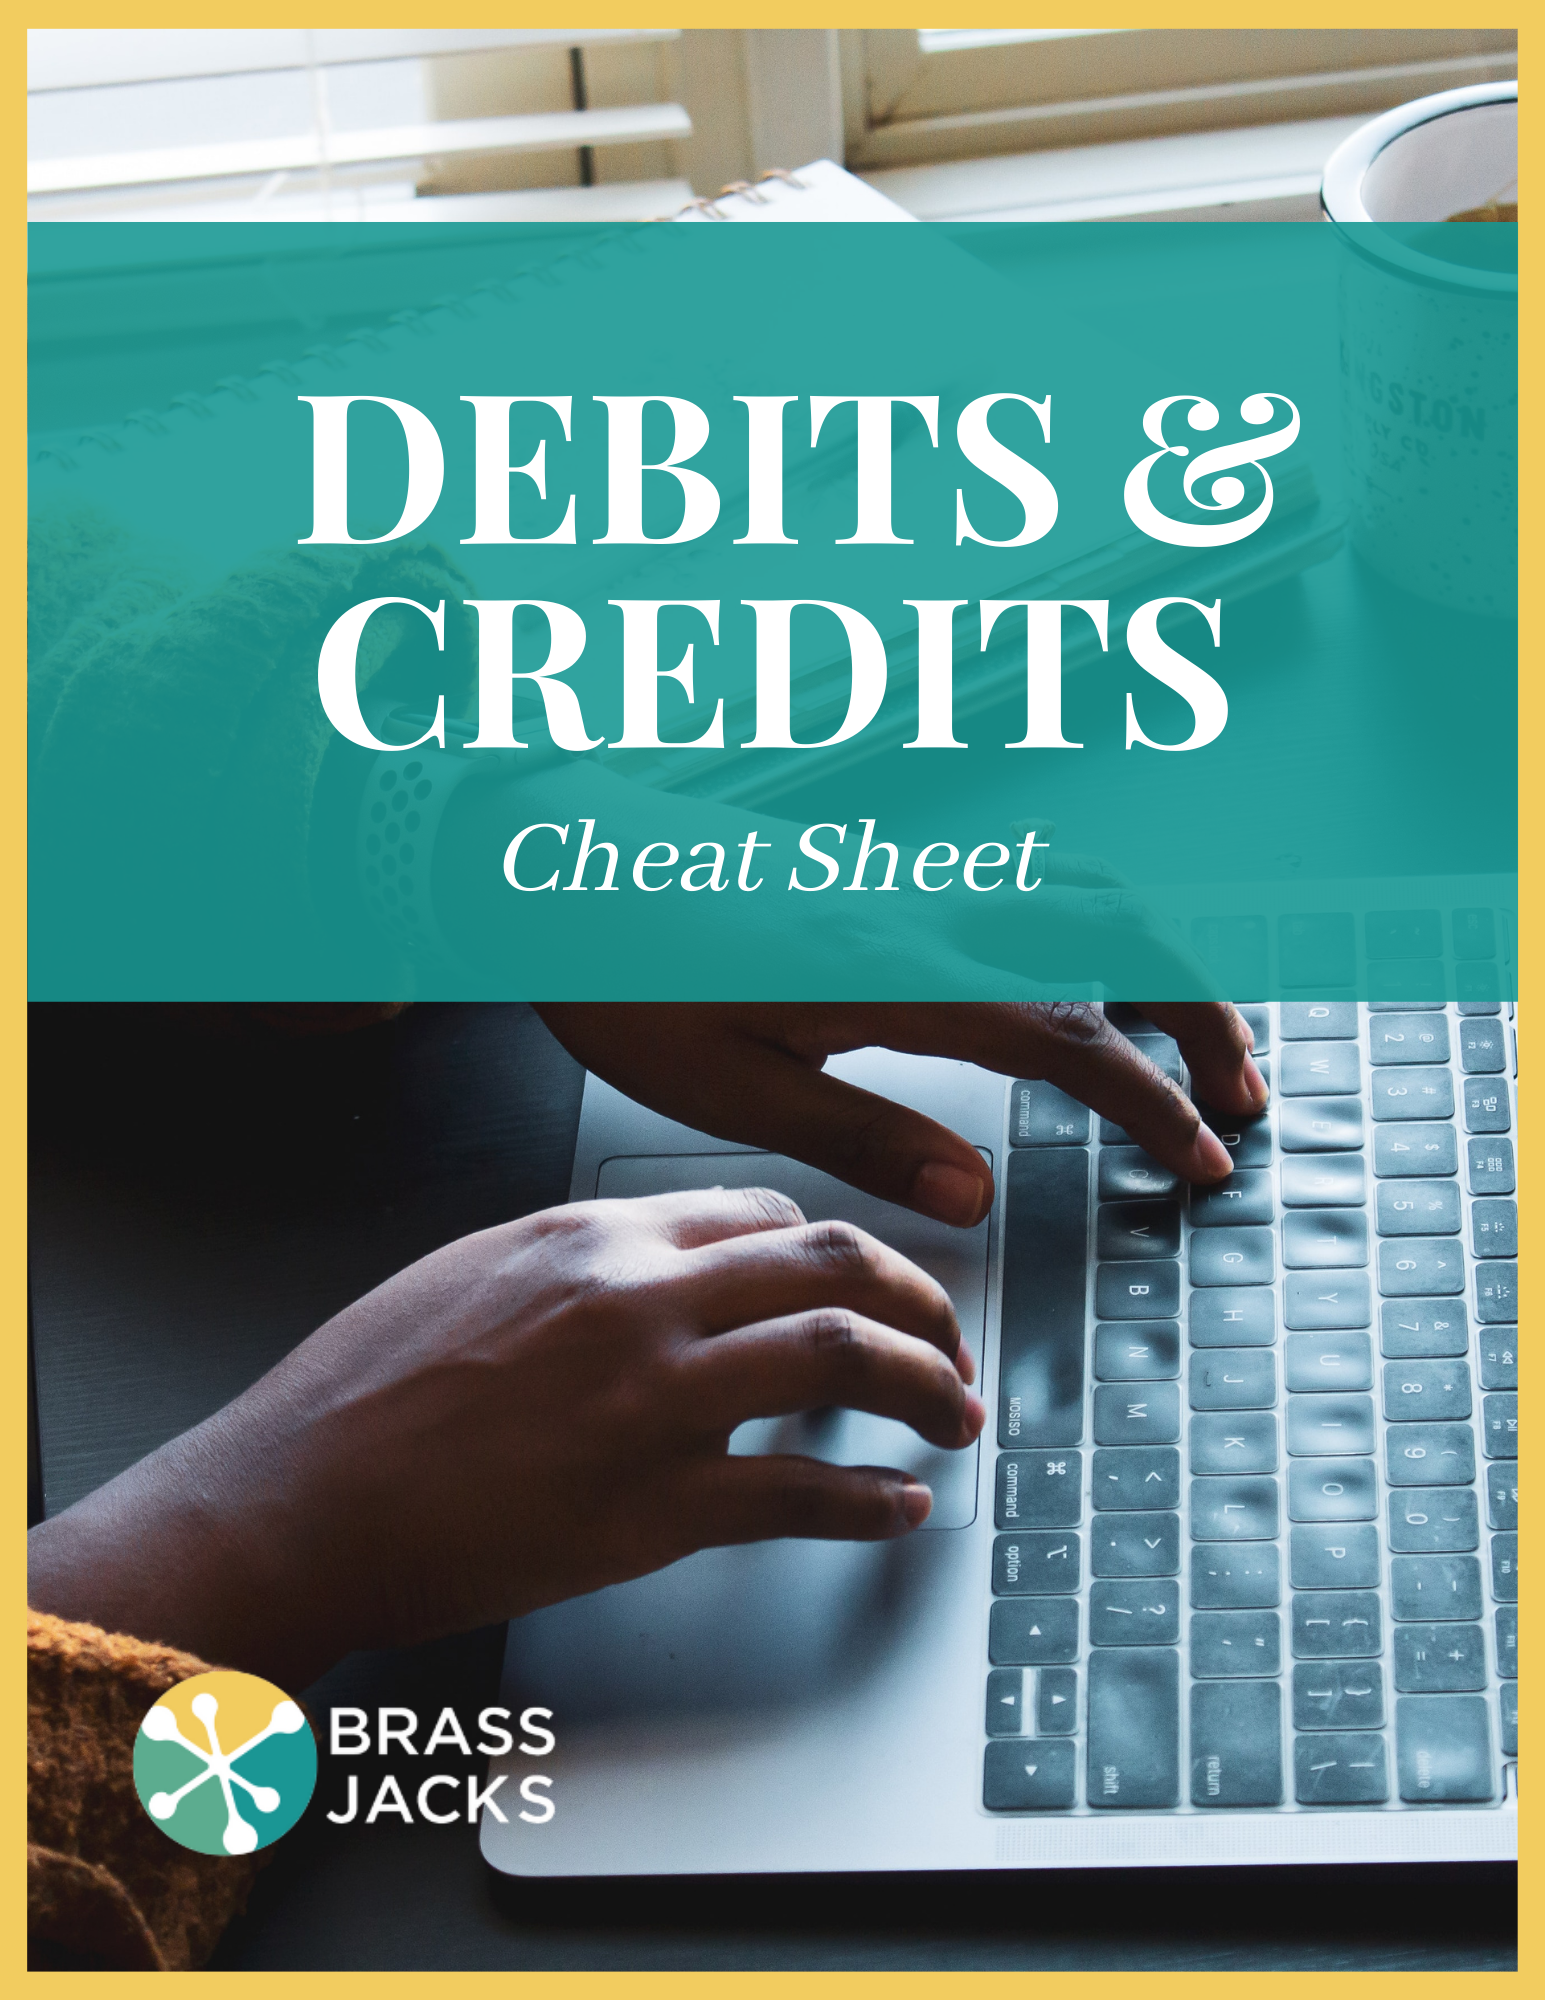 hands typing on keyboard with overlay that reads "Debits & Credits Cheat Sheet"